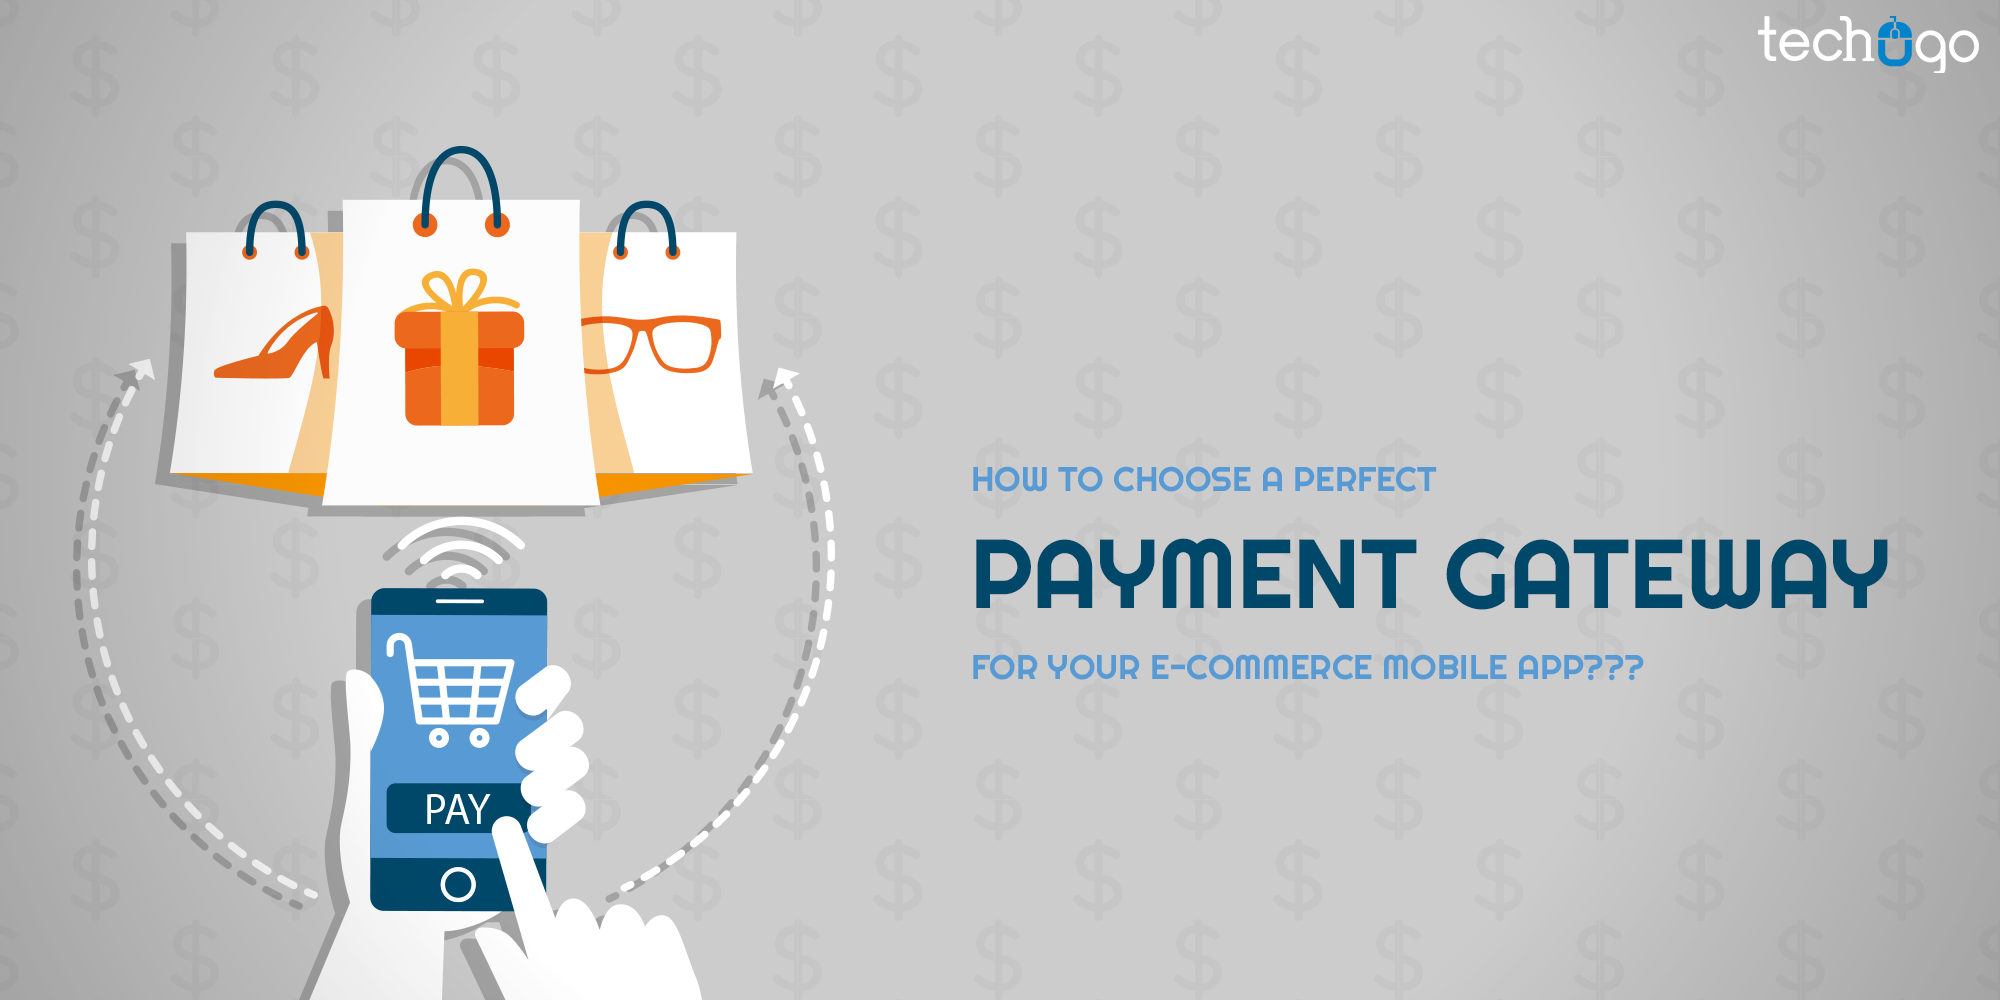 How To Choose A Perfect Payment Gateway For Your E-Commerce Mobile App